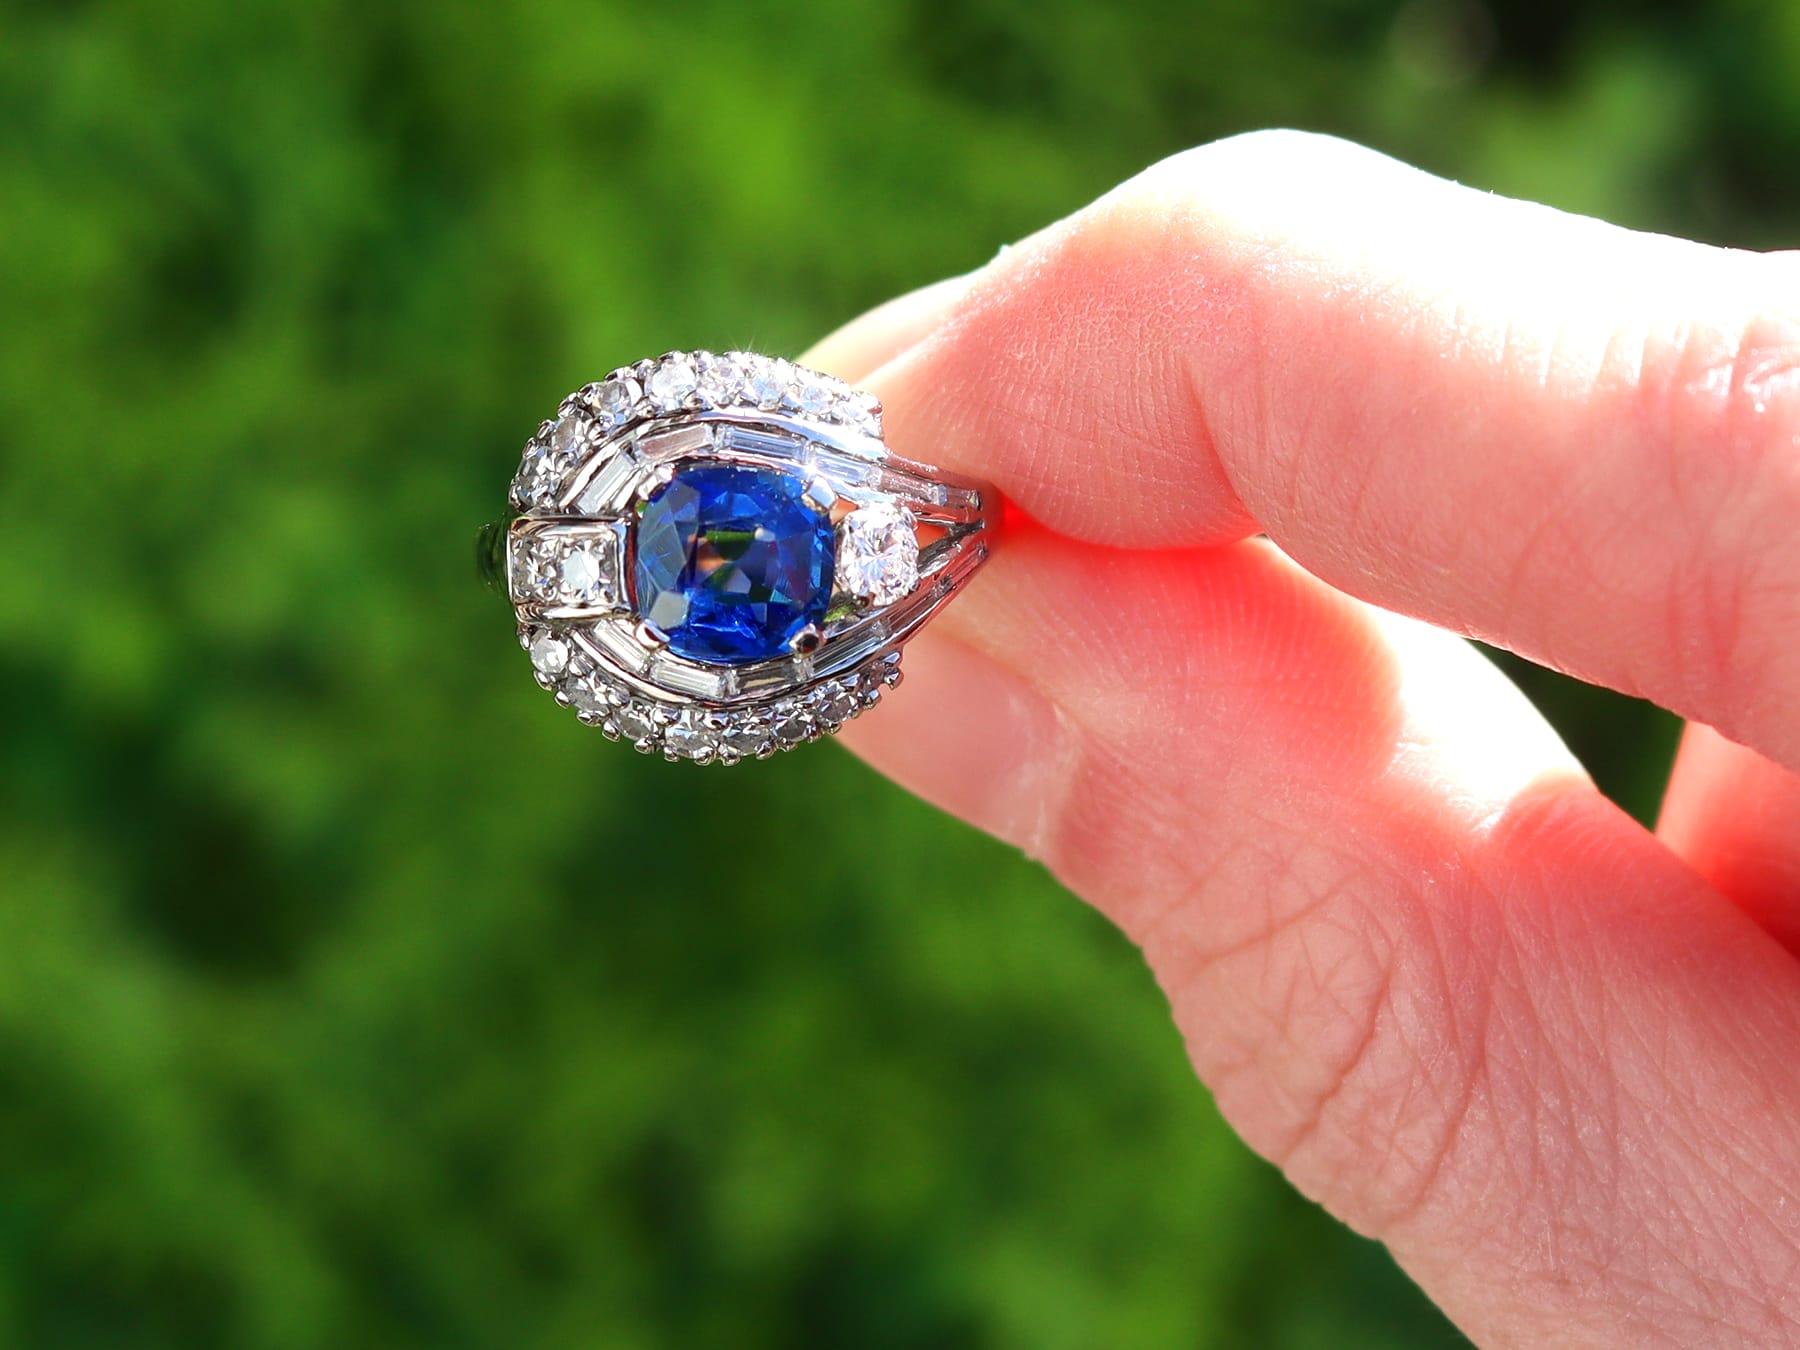 A fine and impressive vintage 1.24 carat Basaltic sapphire and 0.70 carat diamond, 14 karat white gold dress ring; part of our diverse vintage estate jewelry collections.

This stunning, fine and impressive vintage sapphire and diamond ring has been